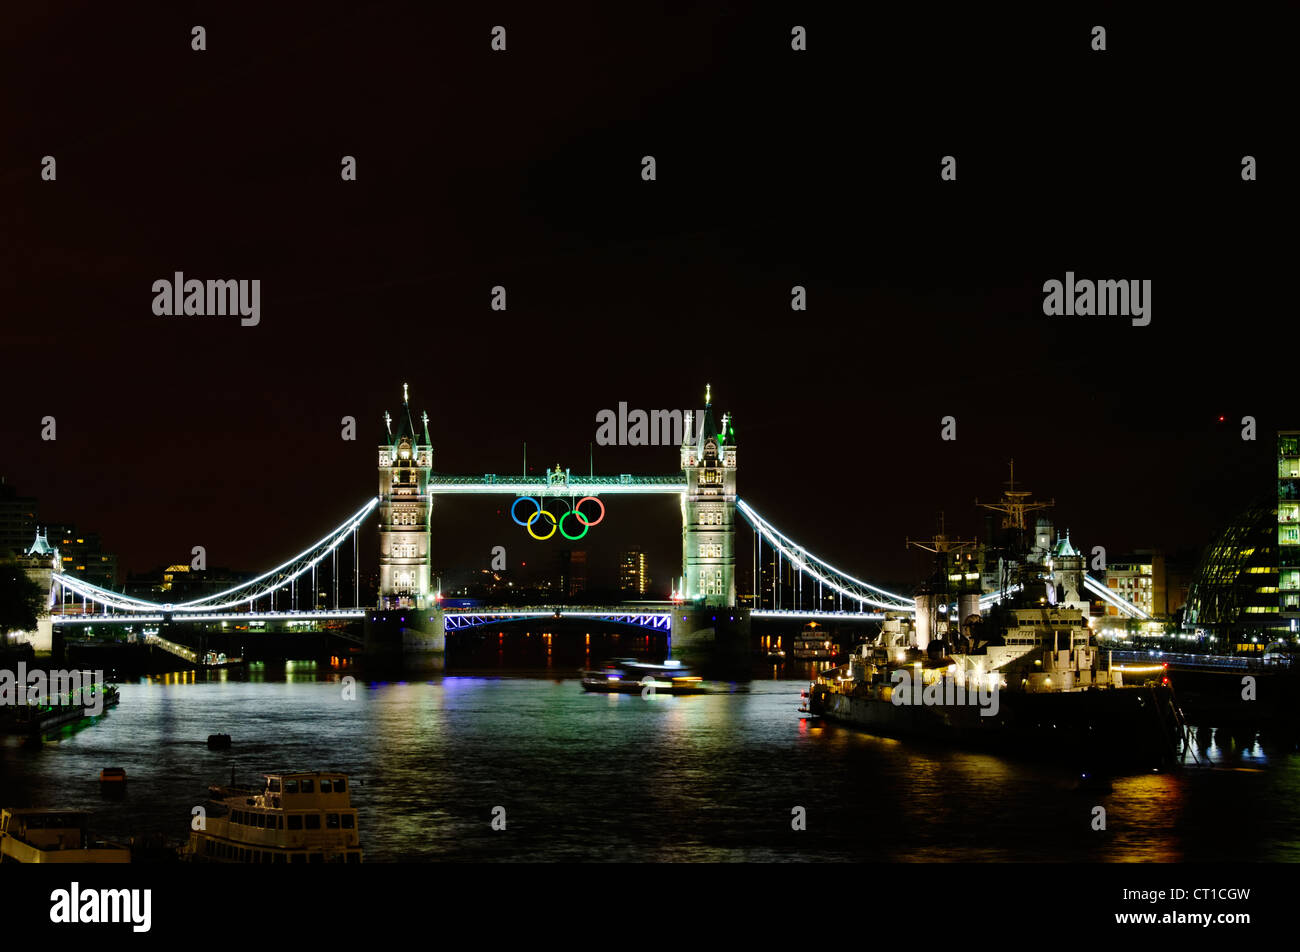 LONDON, UK - JULY 5, 2012: Olympic rings suspended on Tower Bridge in London, night photography. Stock Photo